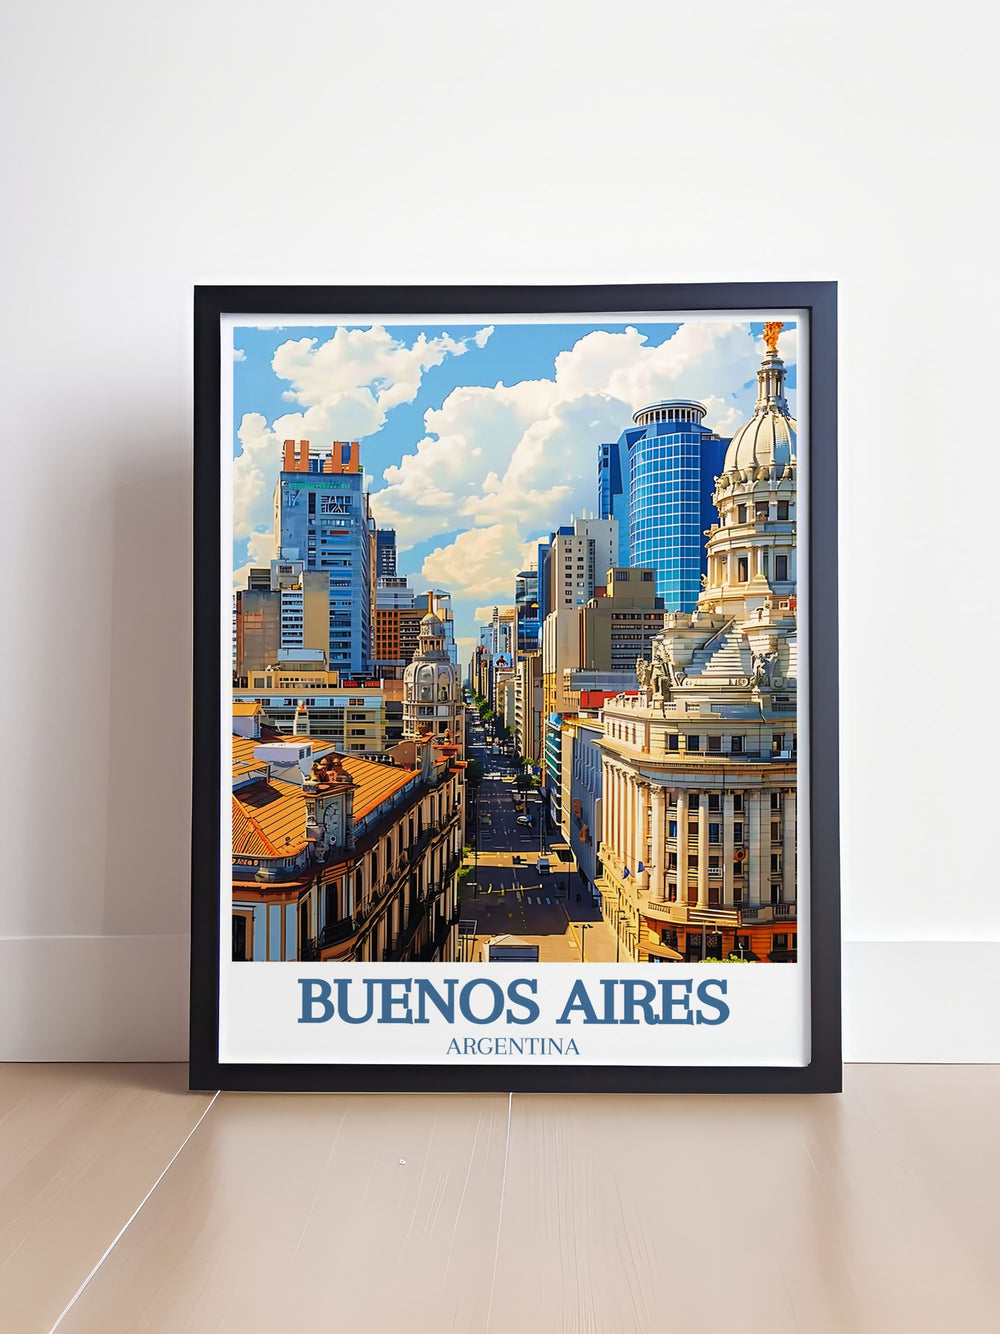 This unique Buenos Aires print of Plaza de Mayo and Casa Rosada captures the essence of Argentinas vibrant history. Ideal for art lovers who appreciate both culture and politics.